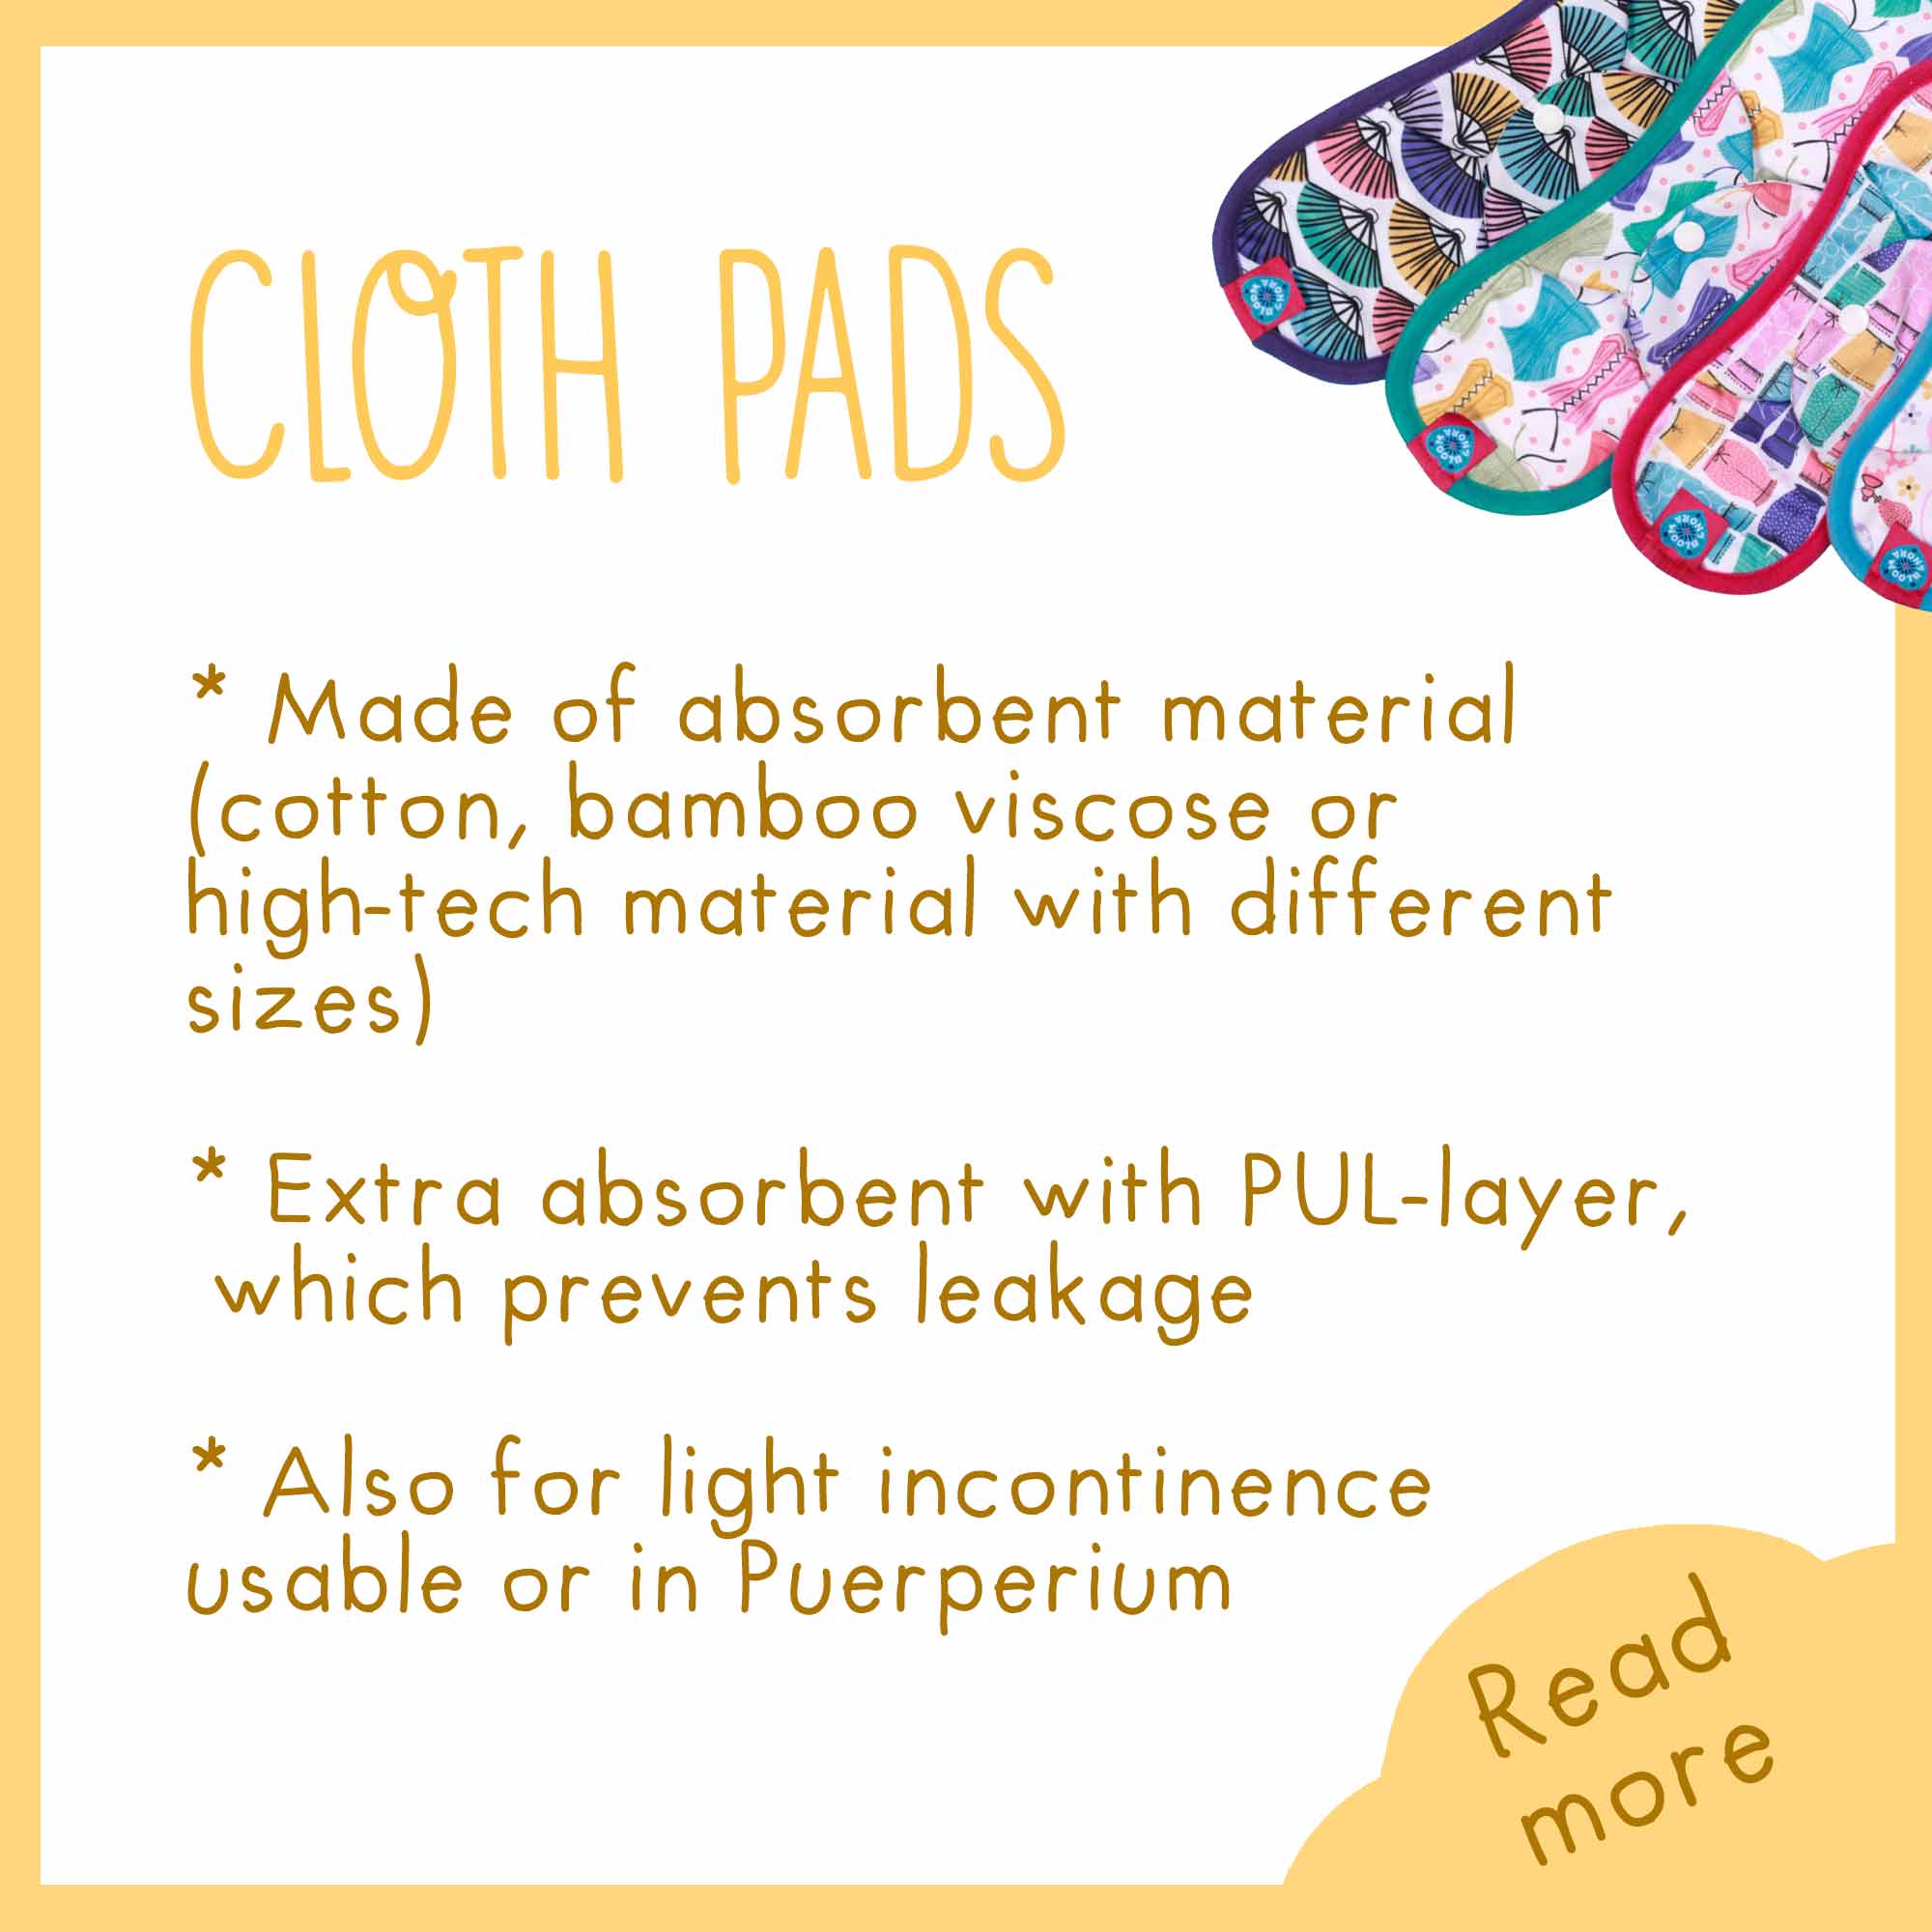 cloth pads, made of absobent material cotton, bamboo viscose or high-tech material with different sizes, extra absorbent with PUL-layer, which prevents leakage. Also for light incontinence usable or in Puerperium